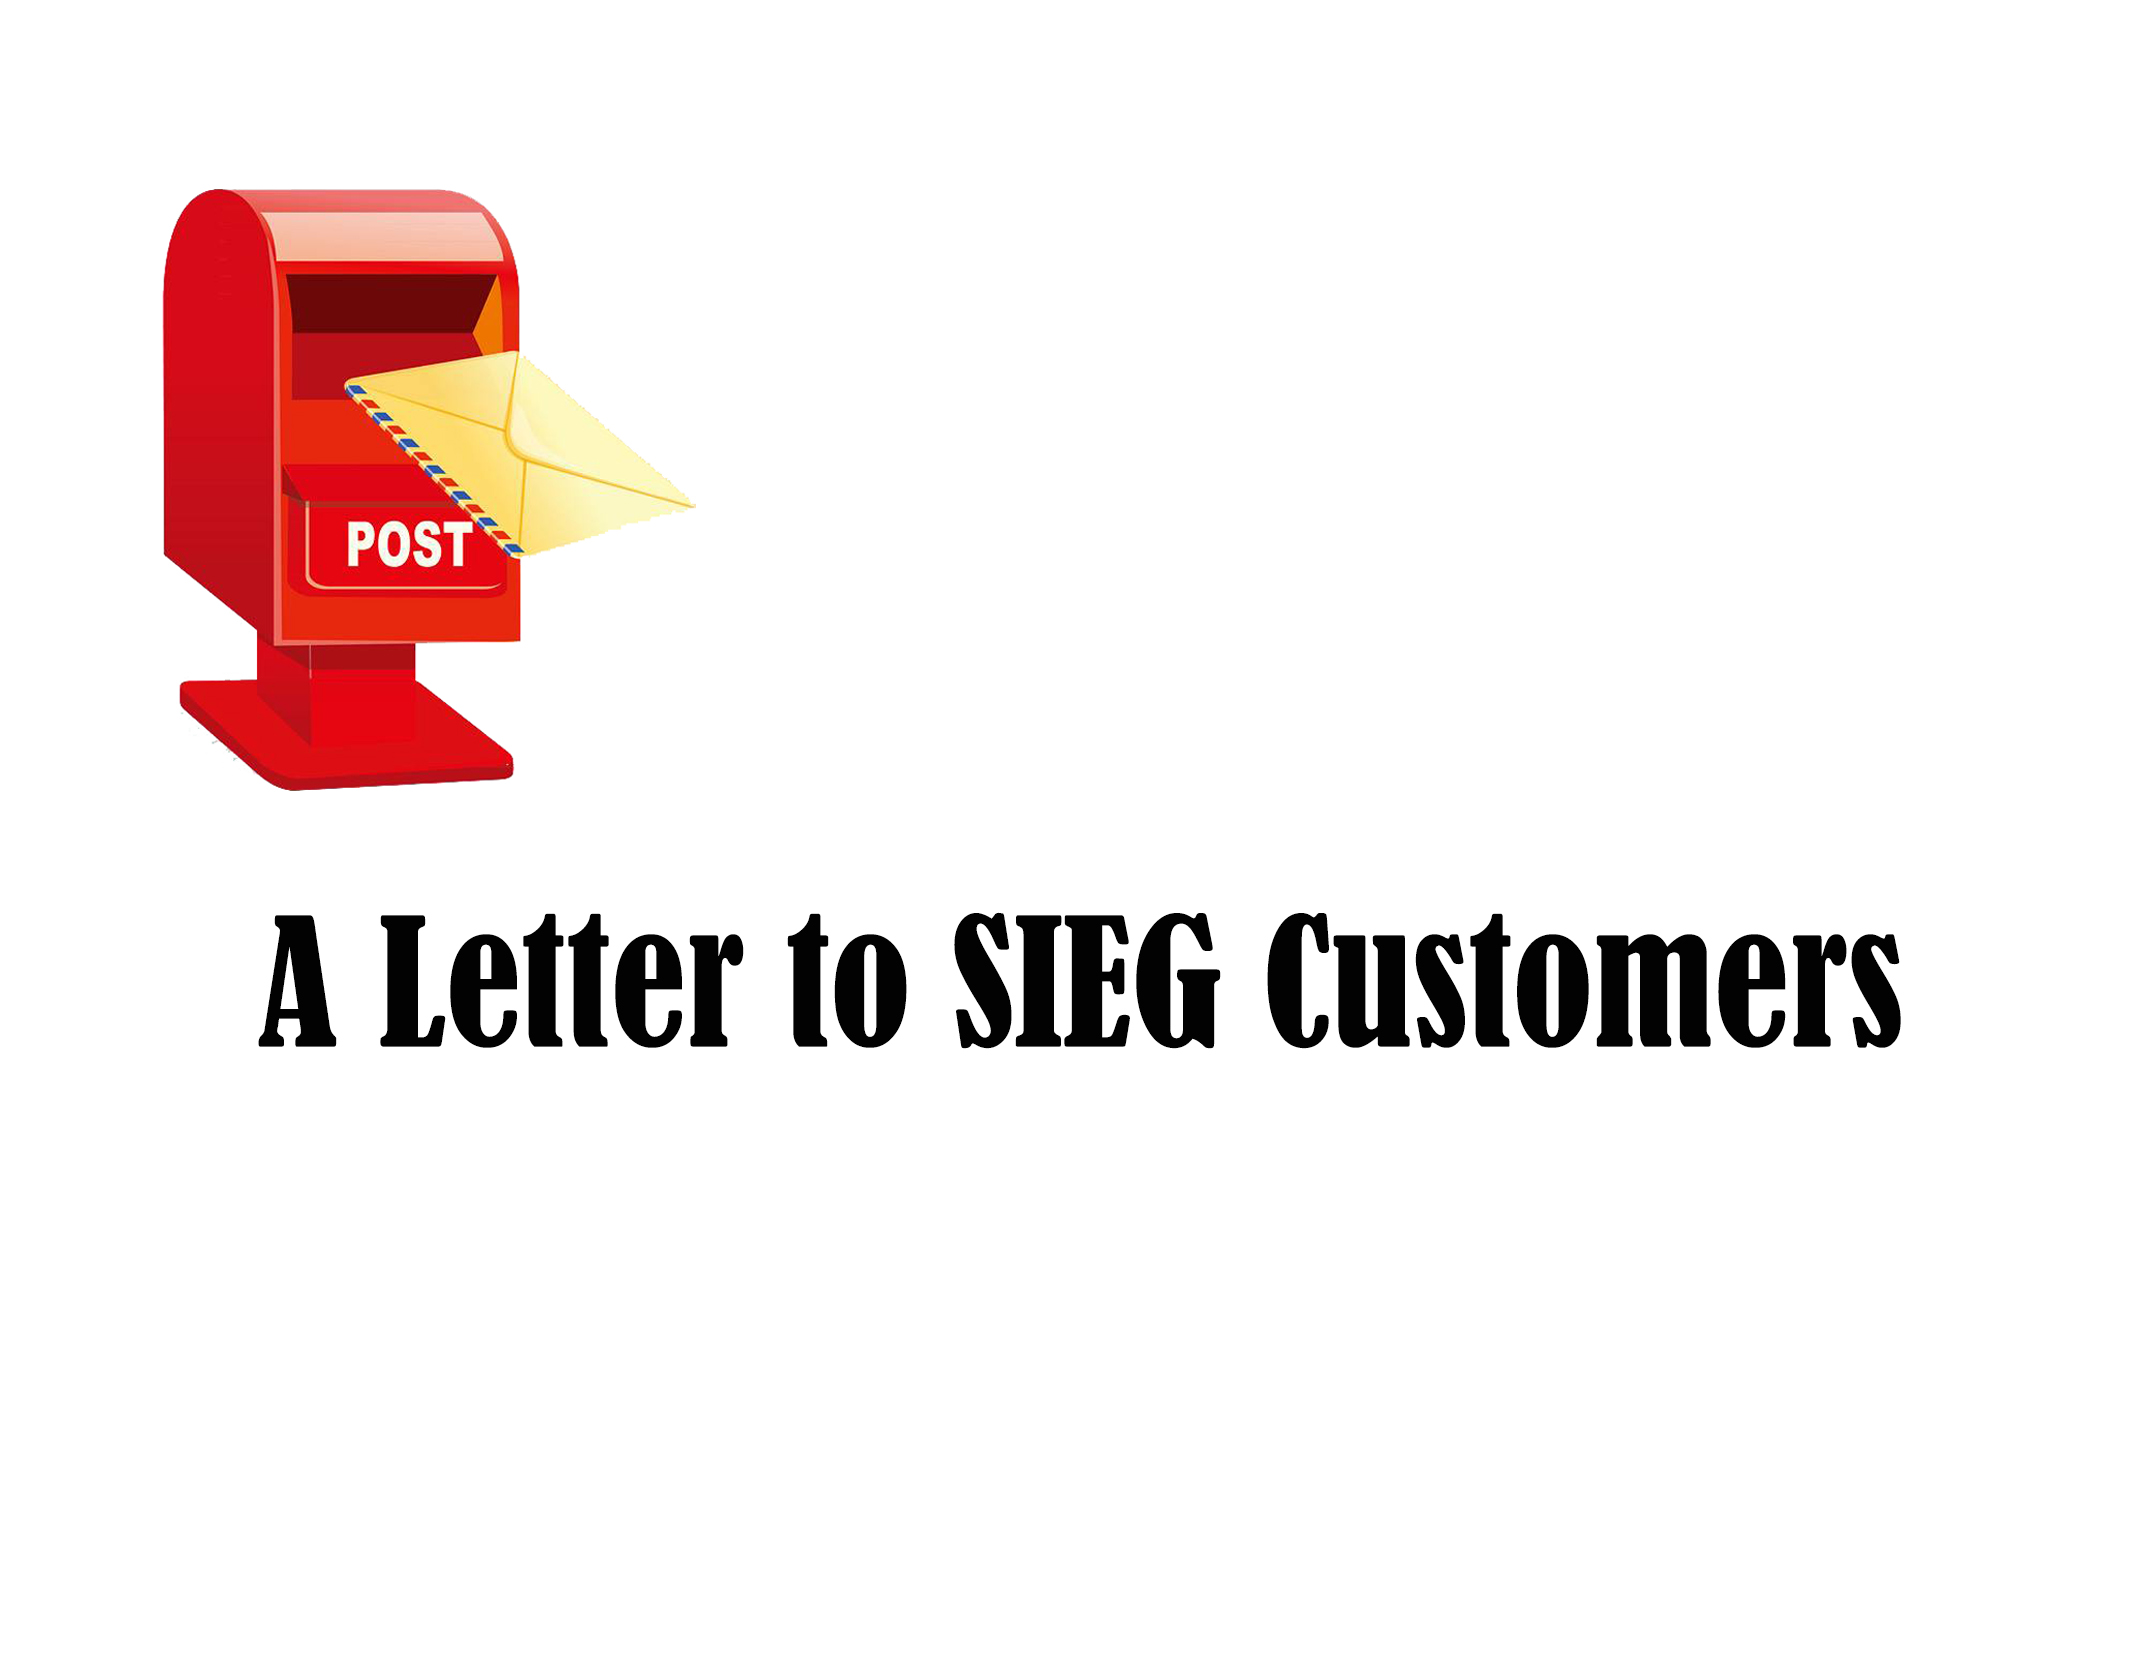 A Letter to SIEG Customers